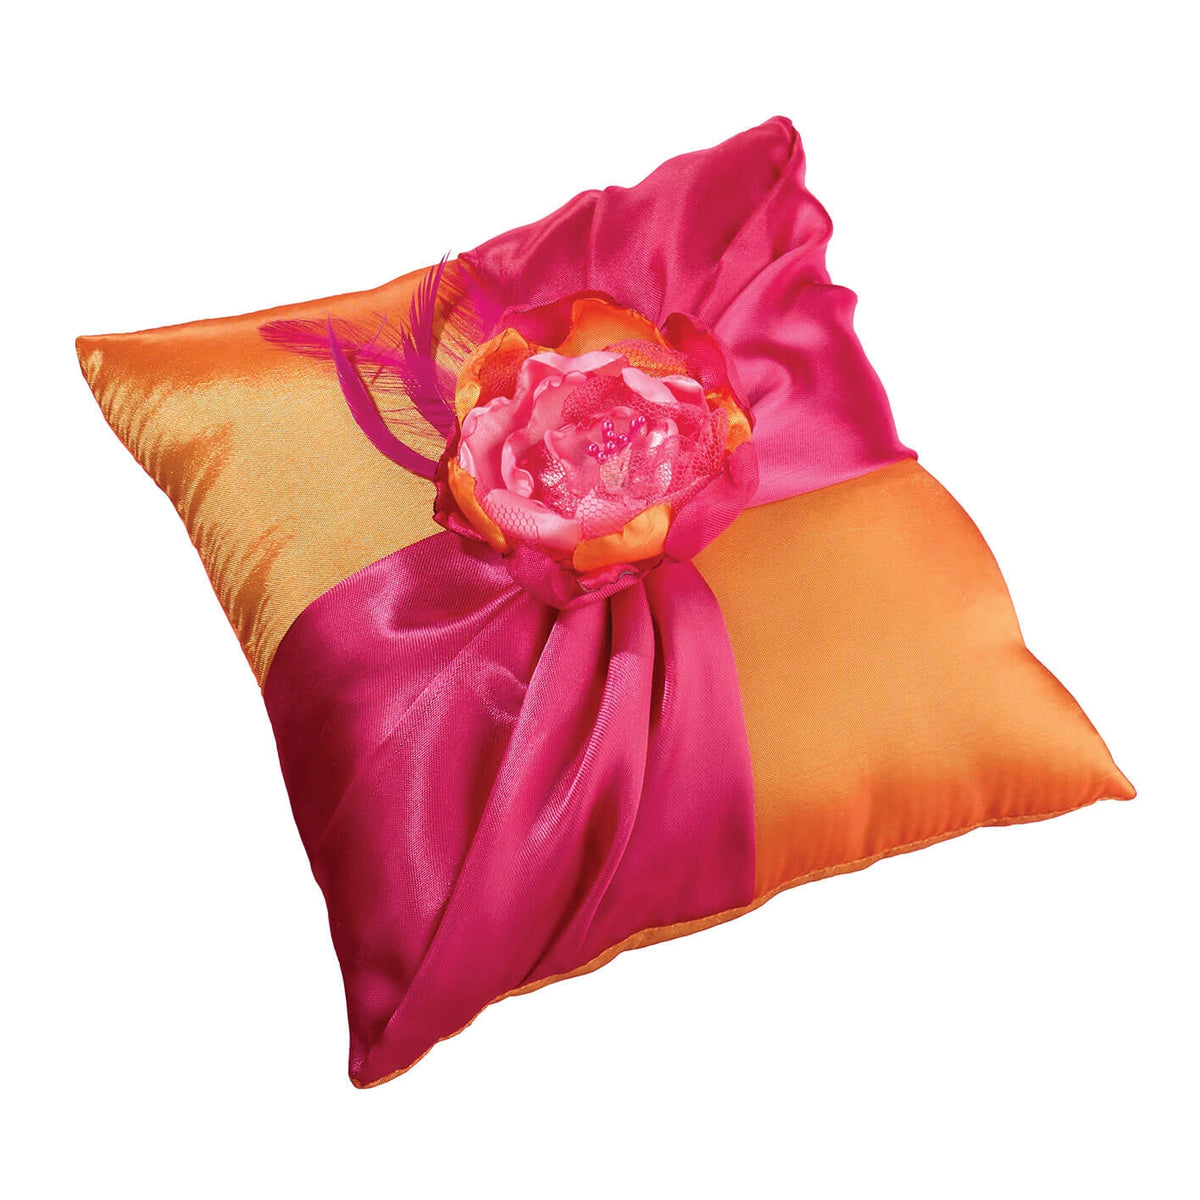 HOT PINK AND ORANGE RING BEARER PILLOW | Ring Pillow - Minter and Richter Designs